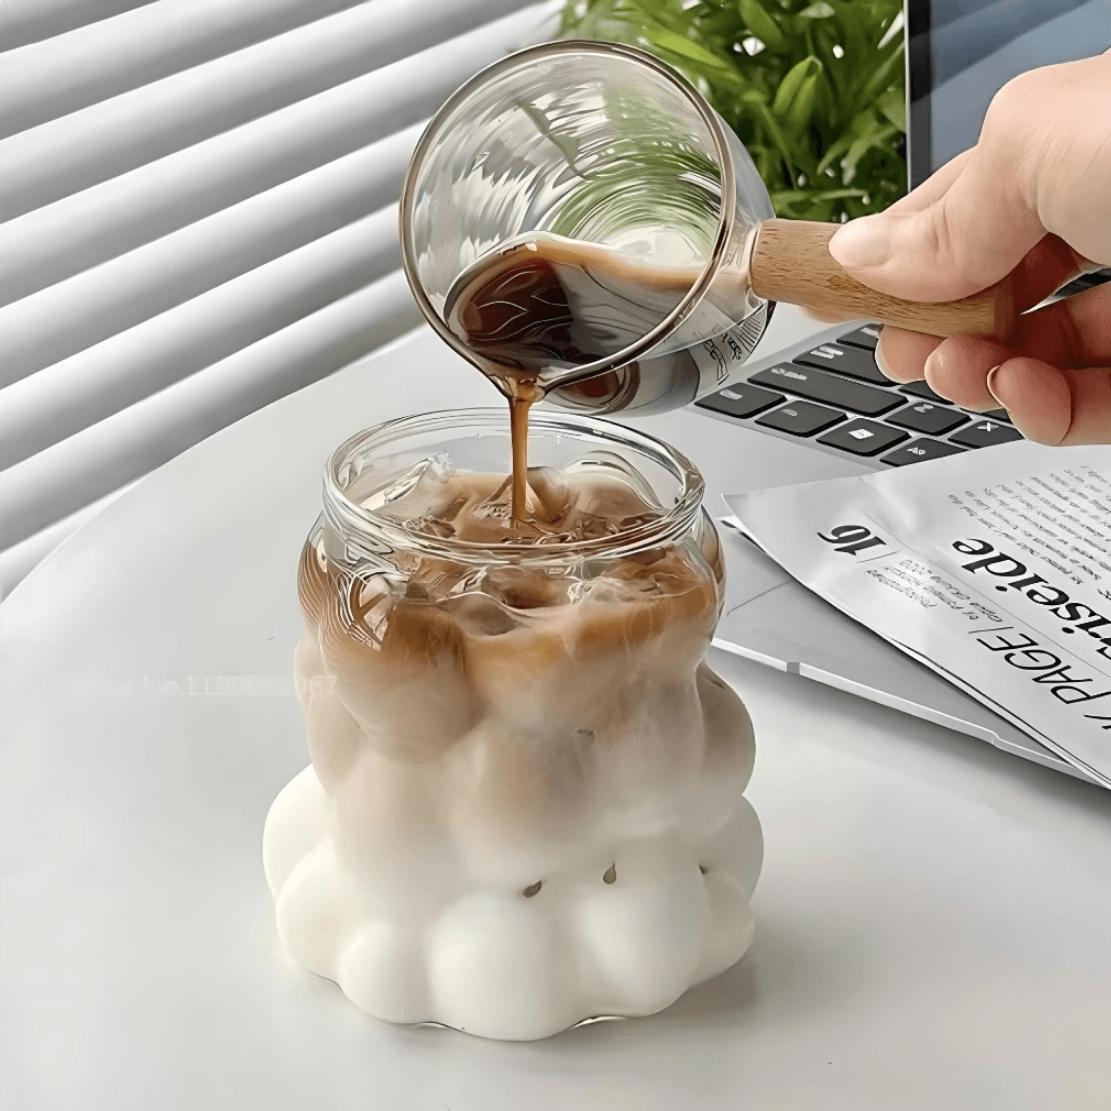 Bubble drinking glass with ice cafe latte